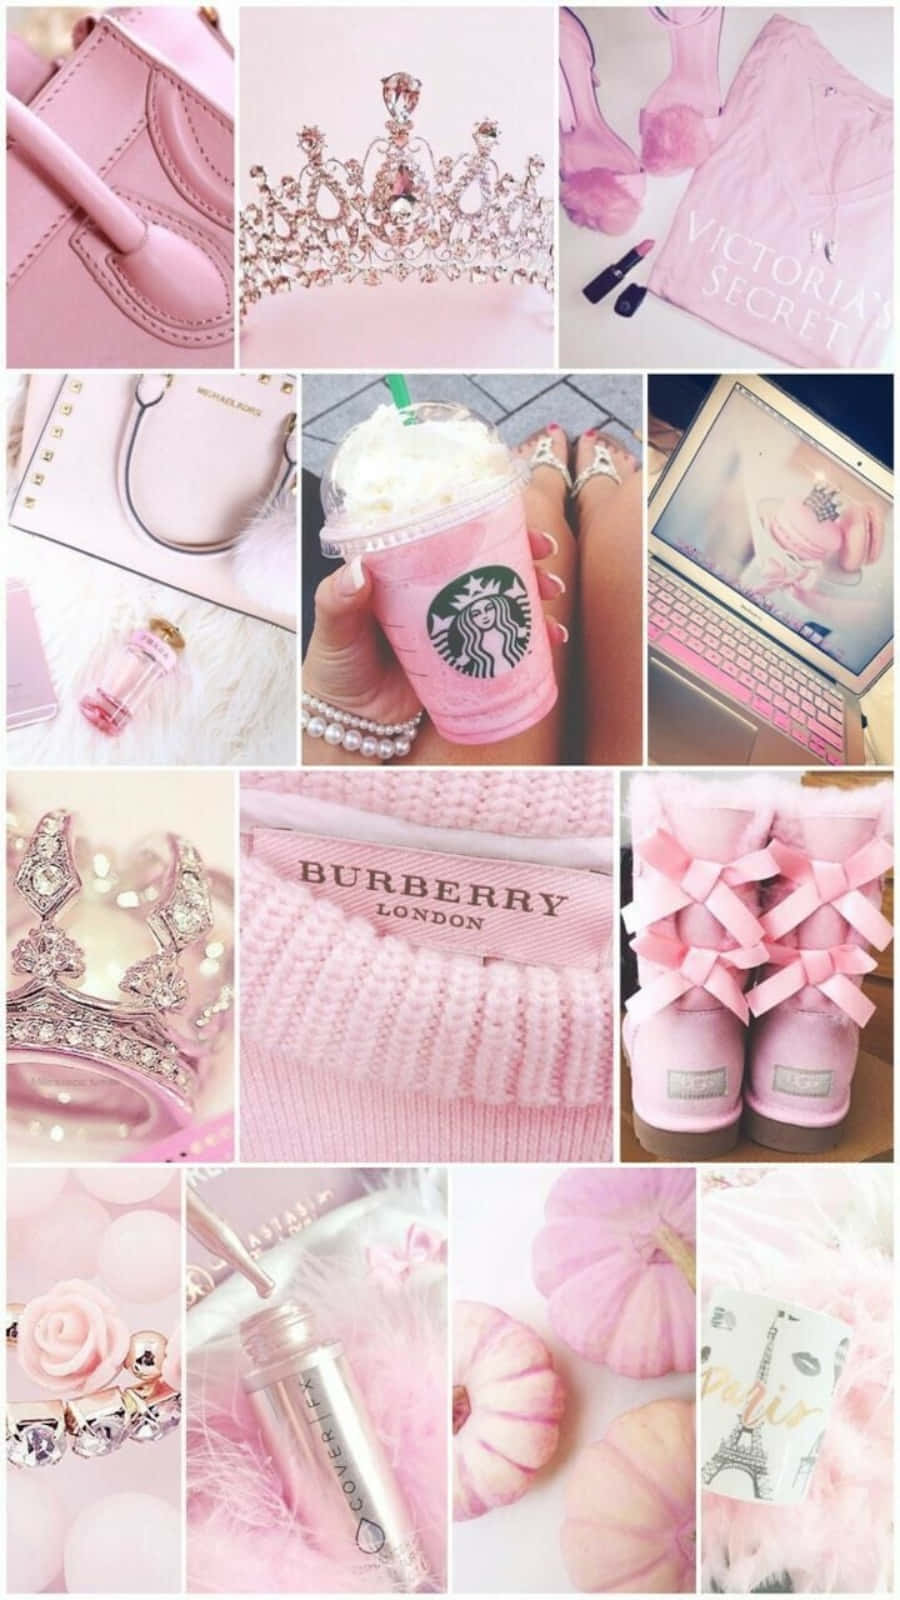 Iphone Collage Of Women's Accessories Wallpaper